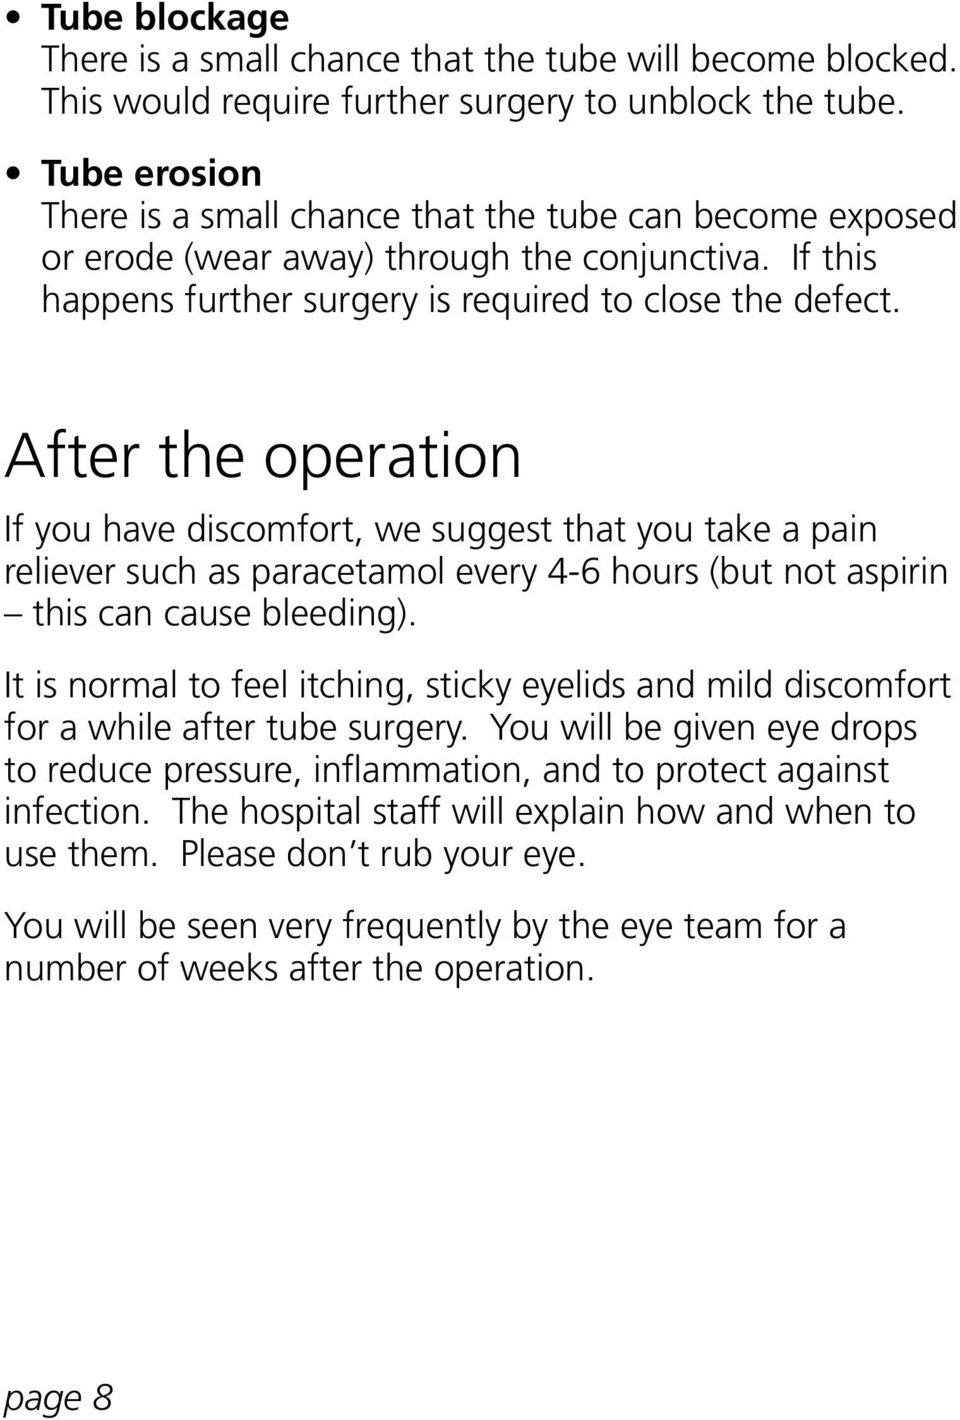 After the operation If you have discomfort, we suggest that you take a pain reliever such as paracetamol every 4-6 hours (but not aspirin this can cause bleeding).